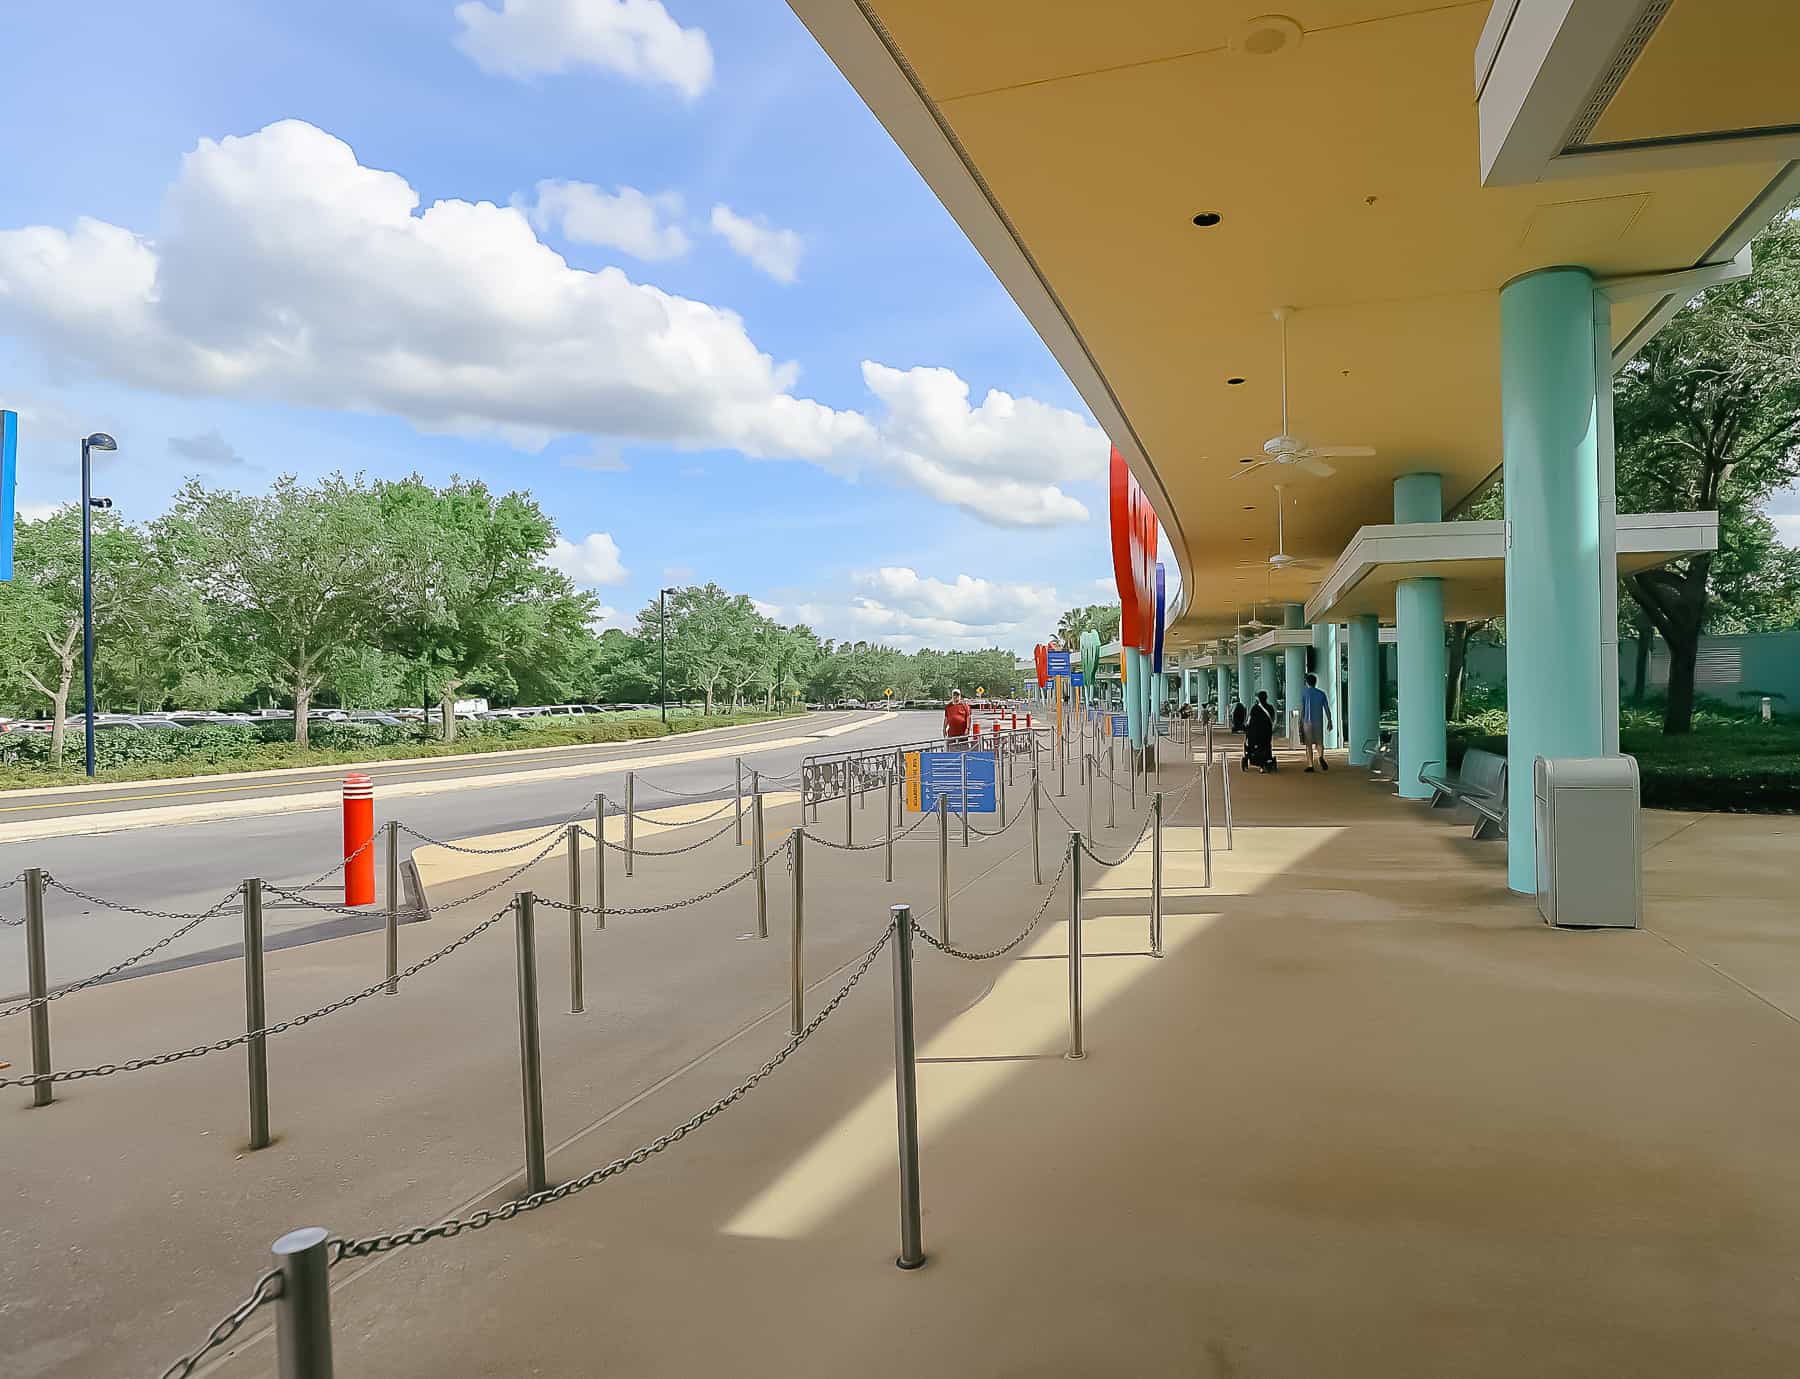 loading area for the bus at Pop Century 